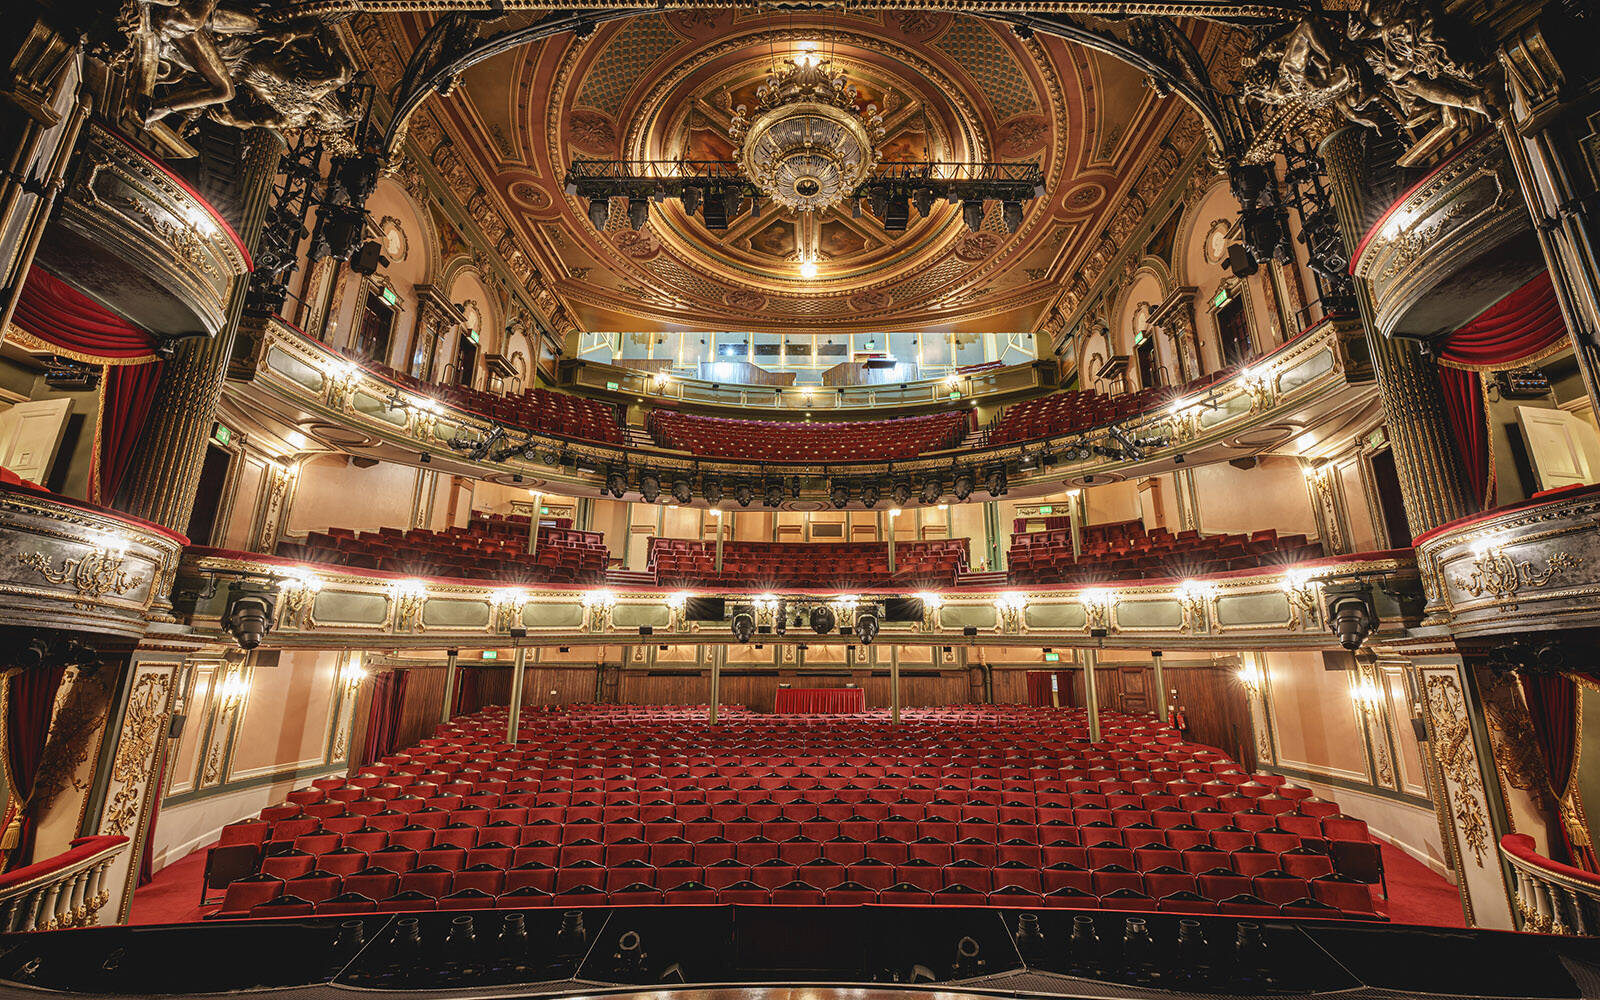 Her Majesty's Theatre - A Royal History | LW Theatres News